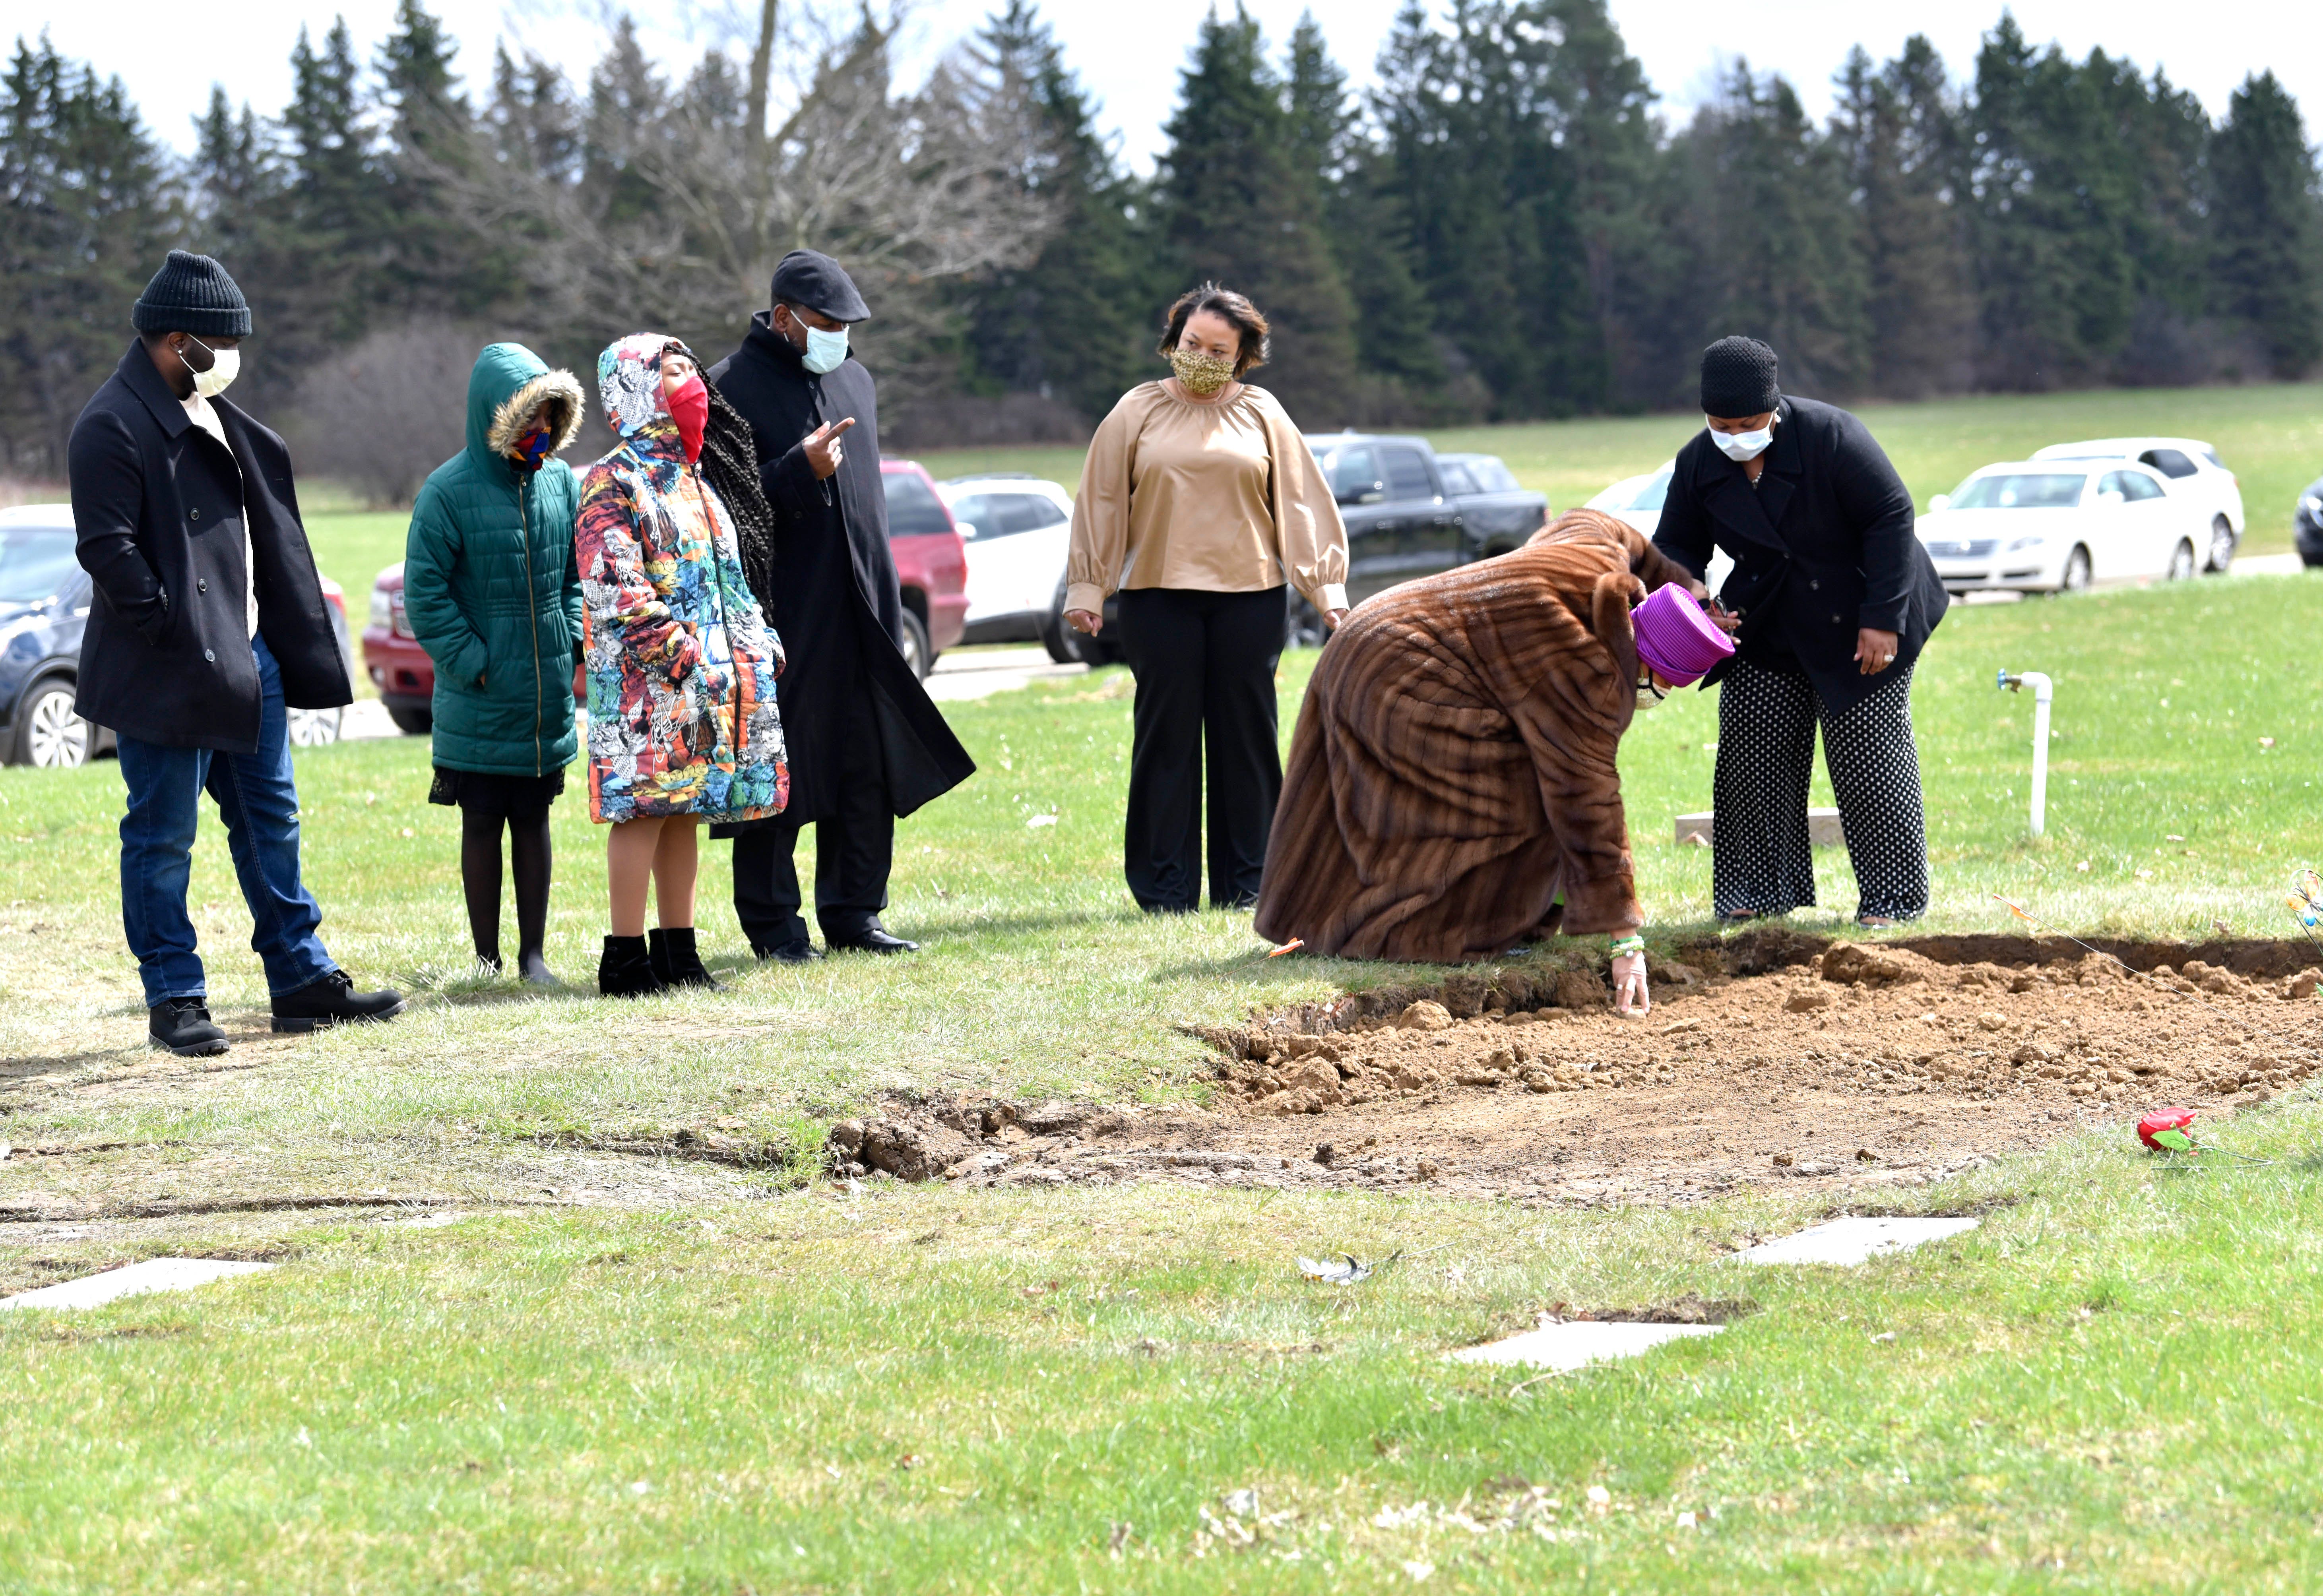 Sandy Brown bends over to pick up a rock from the gravesite of her son, Freddie Lee Brown III, and her husband, Freddie Lee Brown Jr., whie others pay respects from their vehicle.